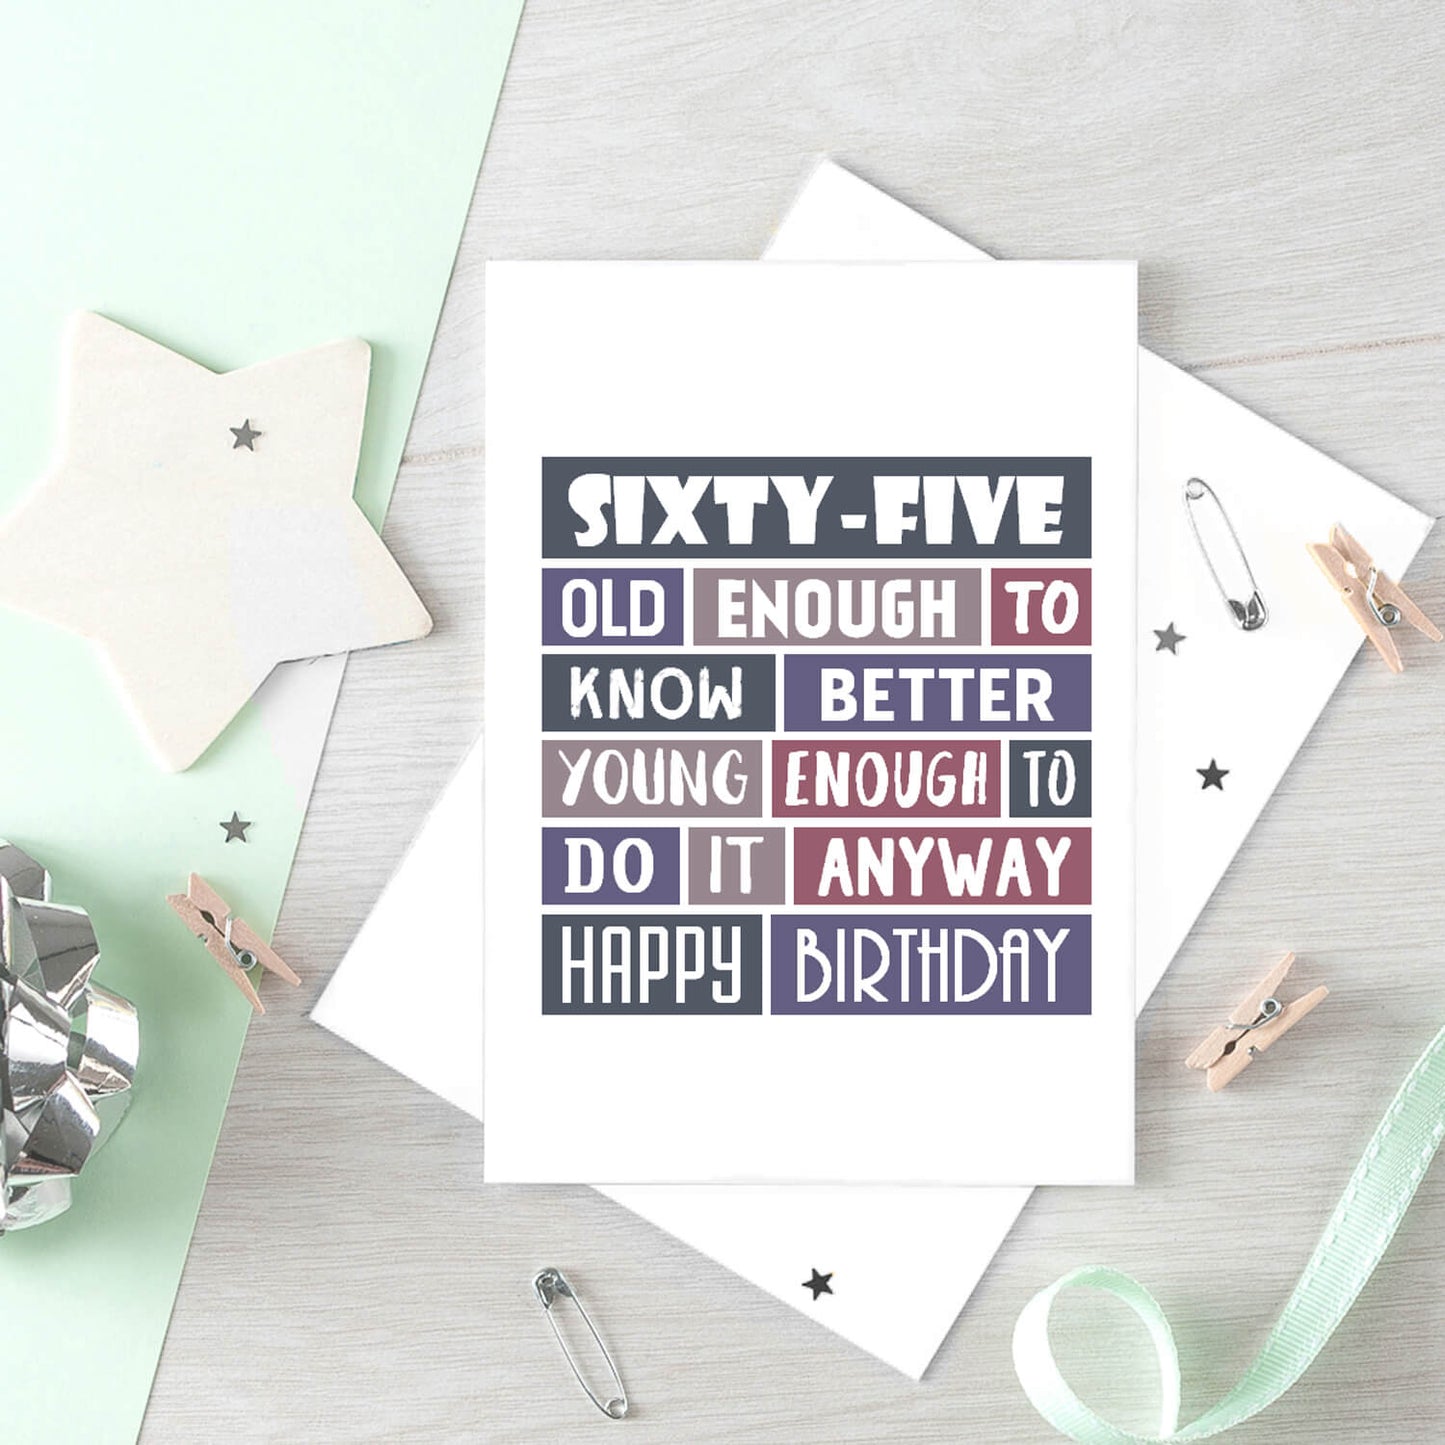 Big 65th Birthday Card by SixElevenCreations. Reads Sixty-Five. Old enough to know better. Young enough to do it anyway. Happy birthday. Product Code SE0293A5